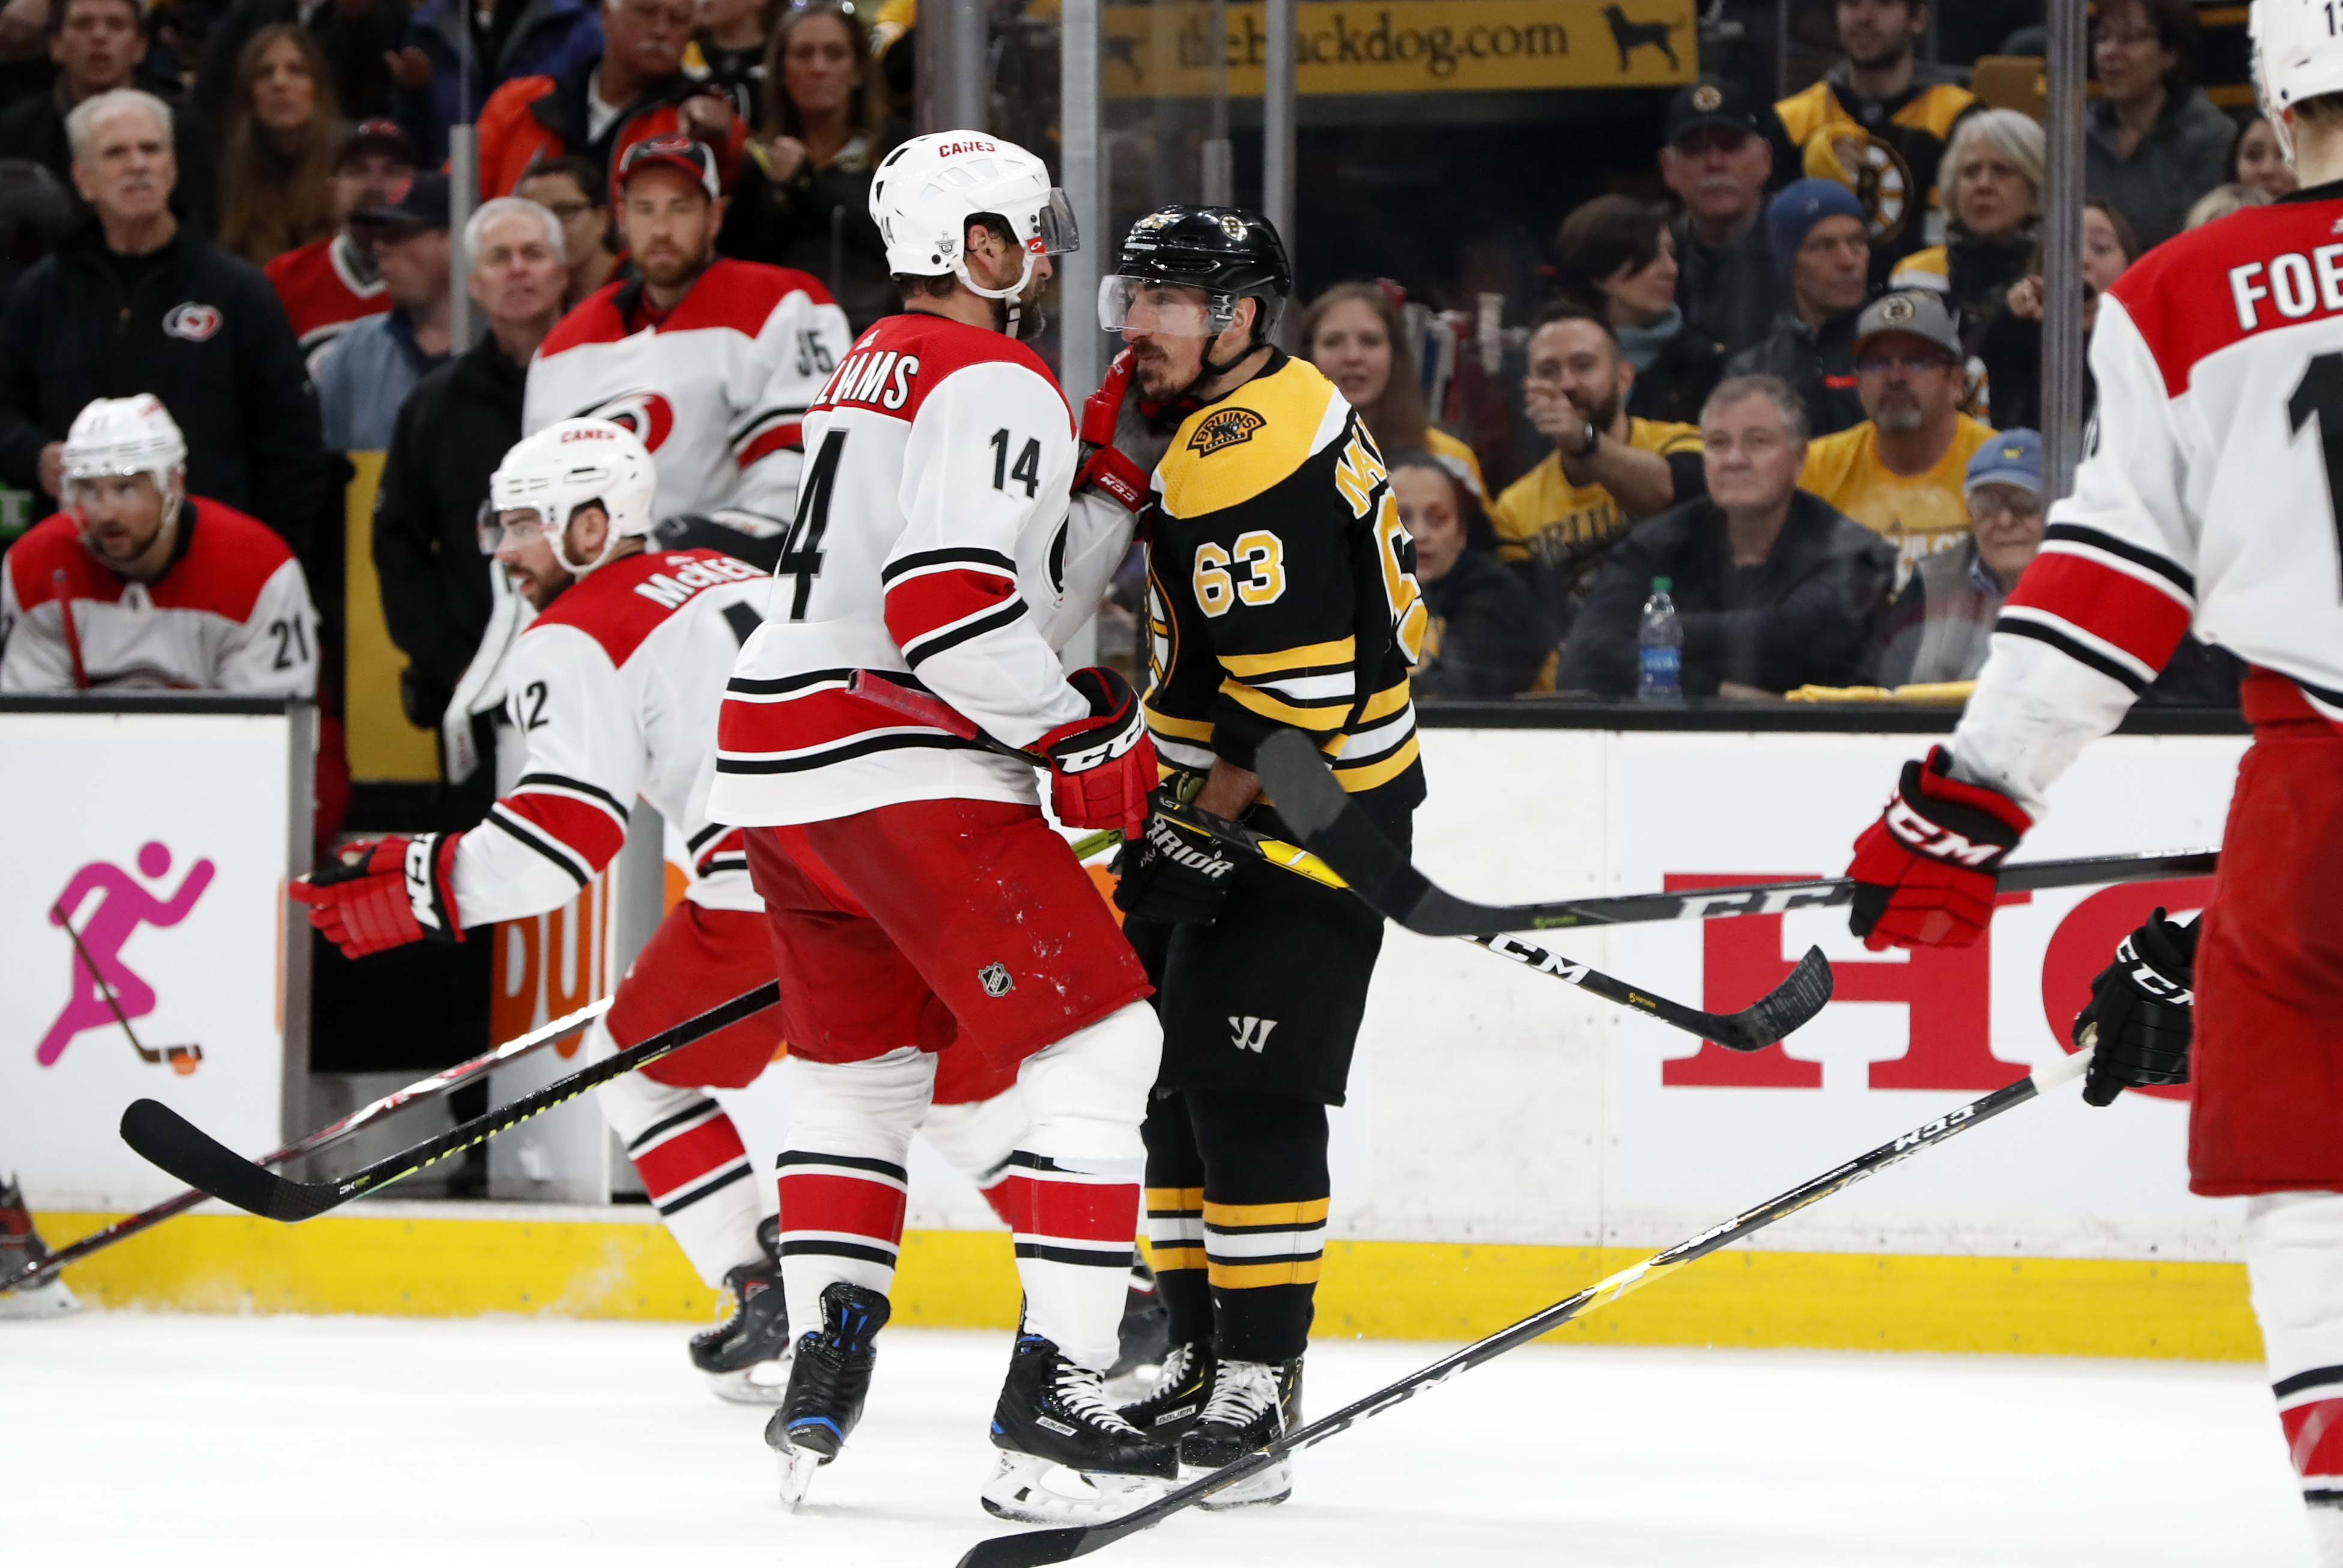 NHL: MAY 12 Stanley Cup Playoffs Eastern Conference Final - Hurricanes at Bruins